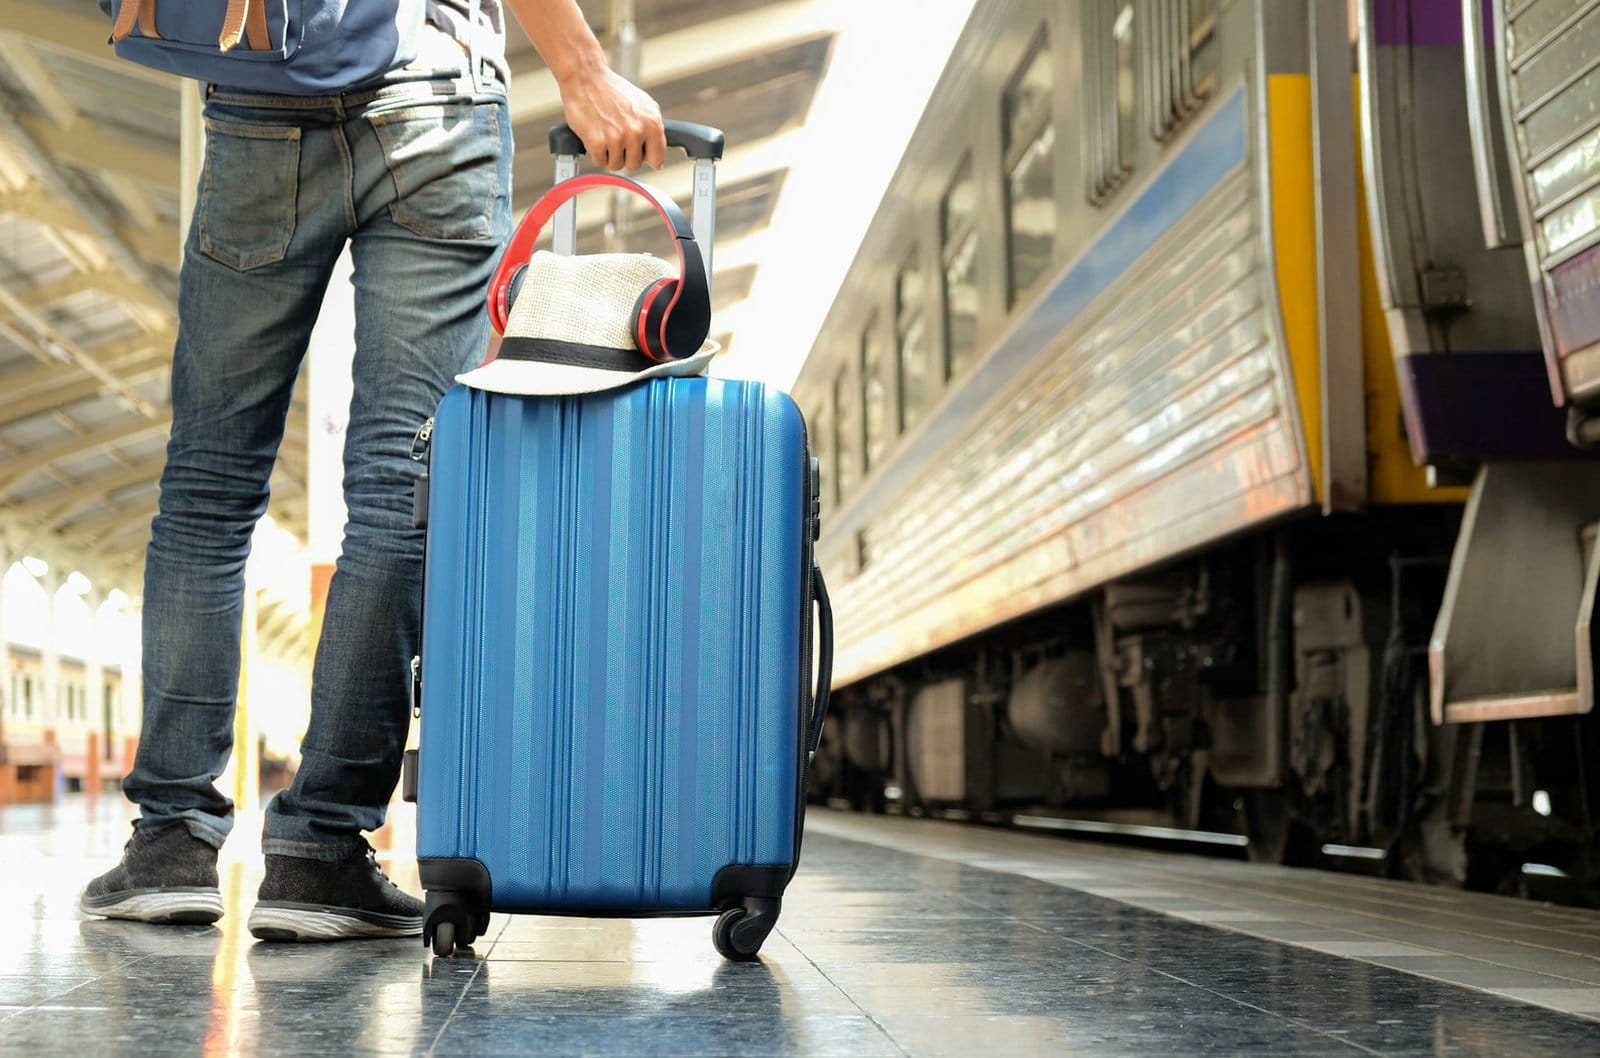 Traveler with a blue suitcase is waiting for the train.Hat and headphone placed on the suitcase.